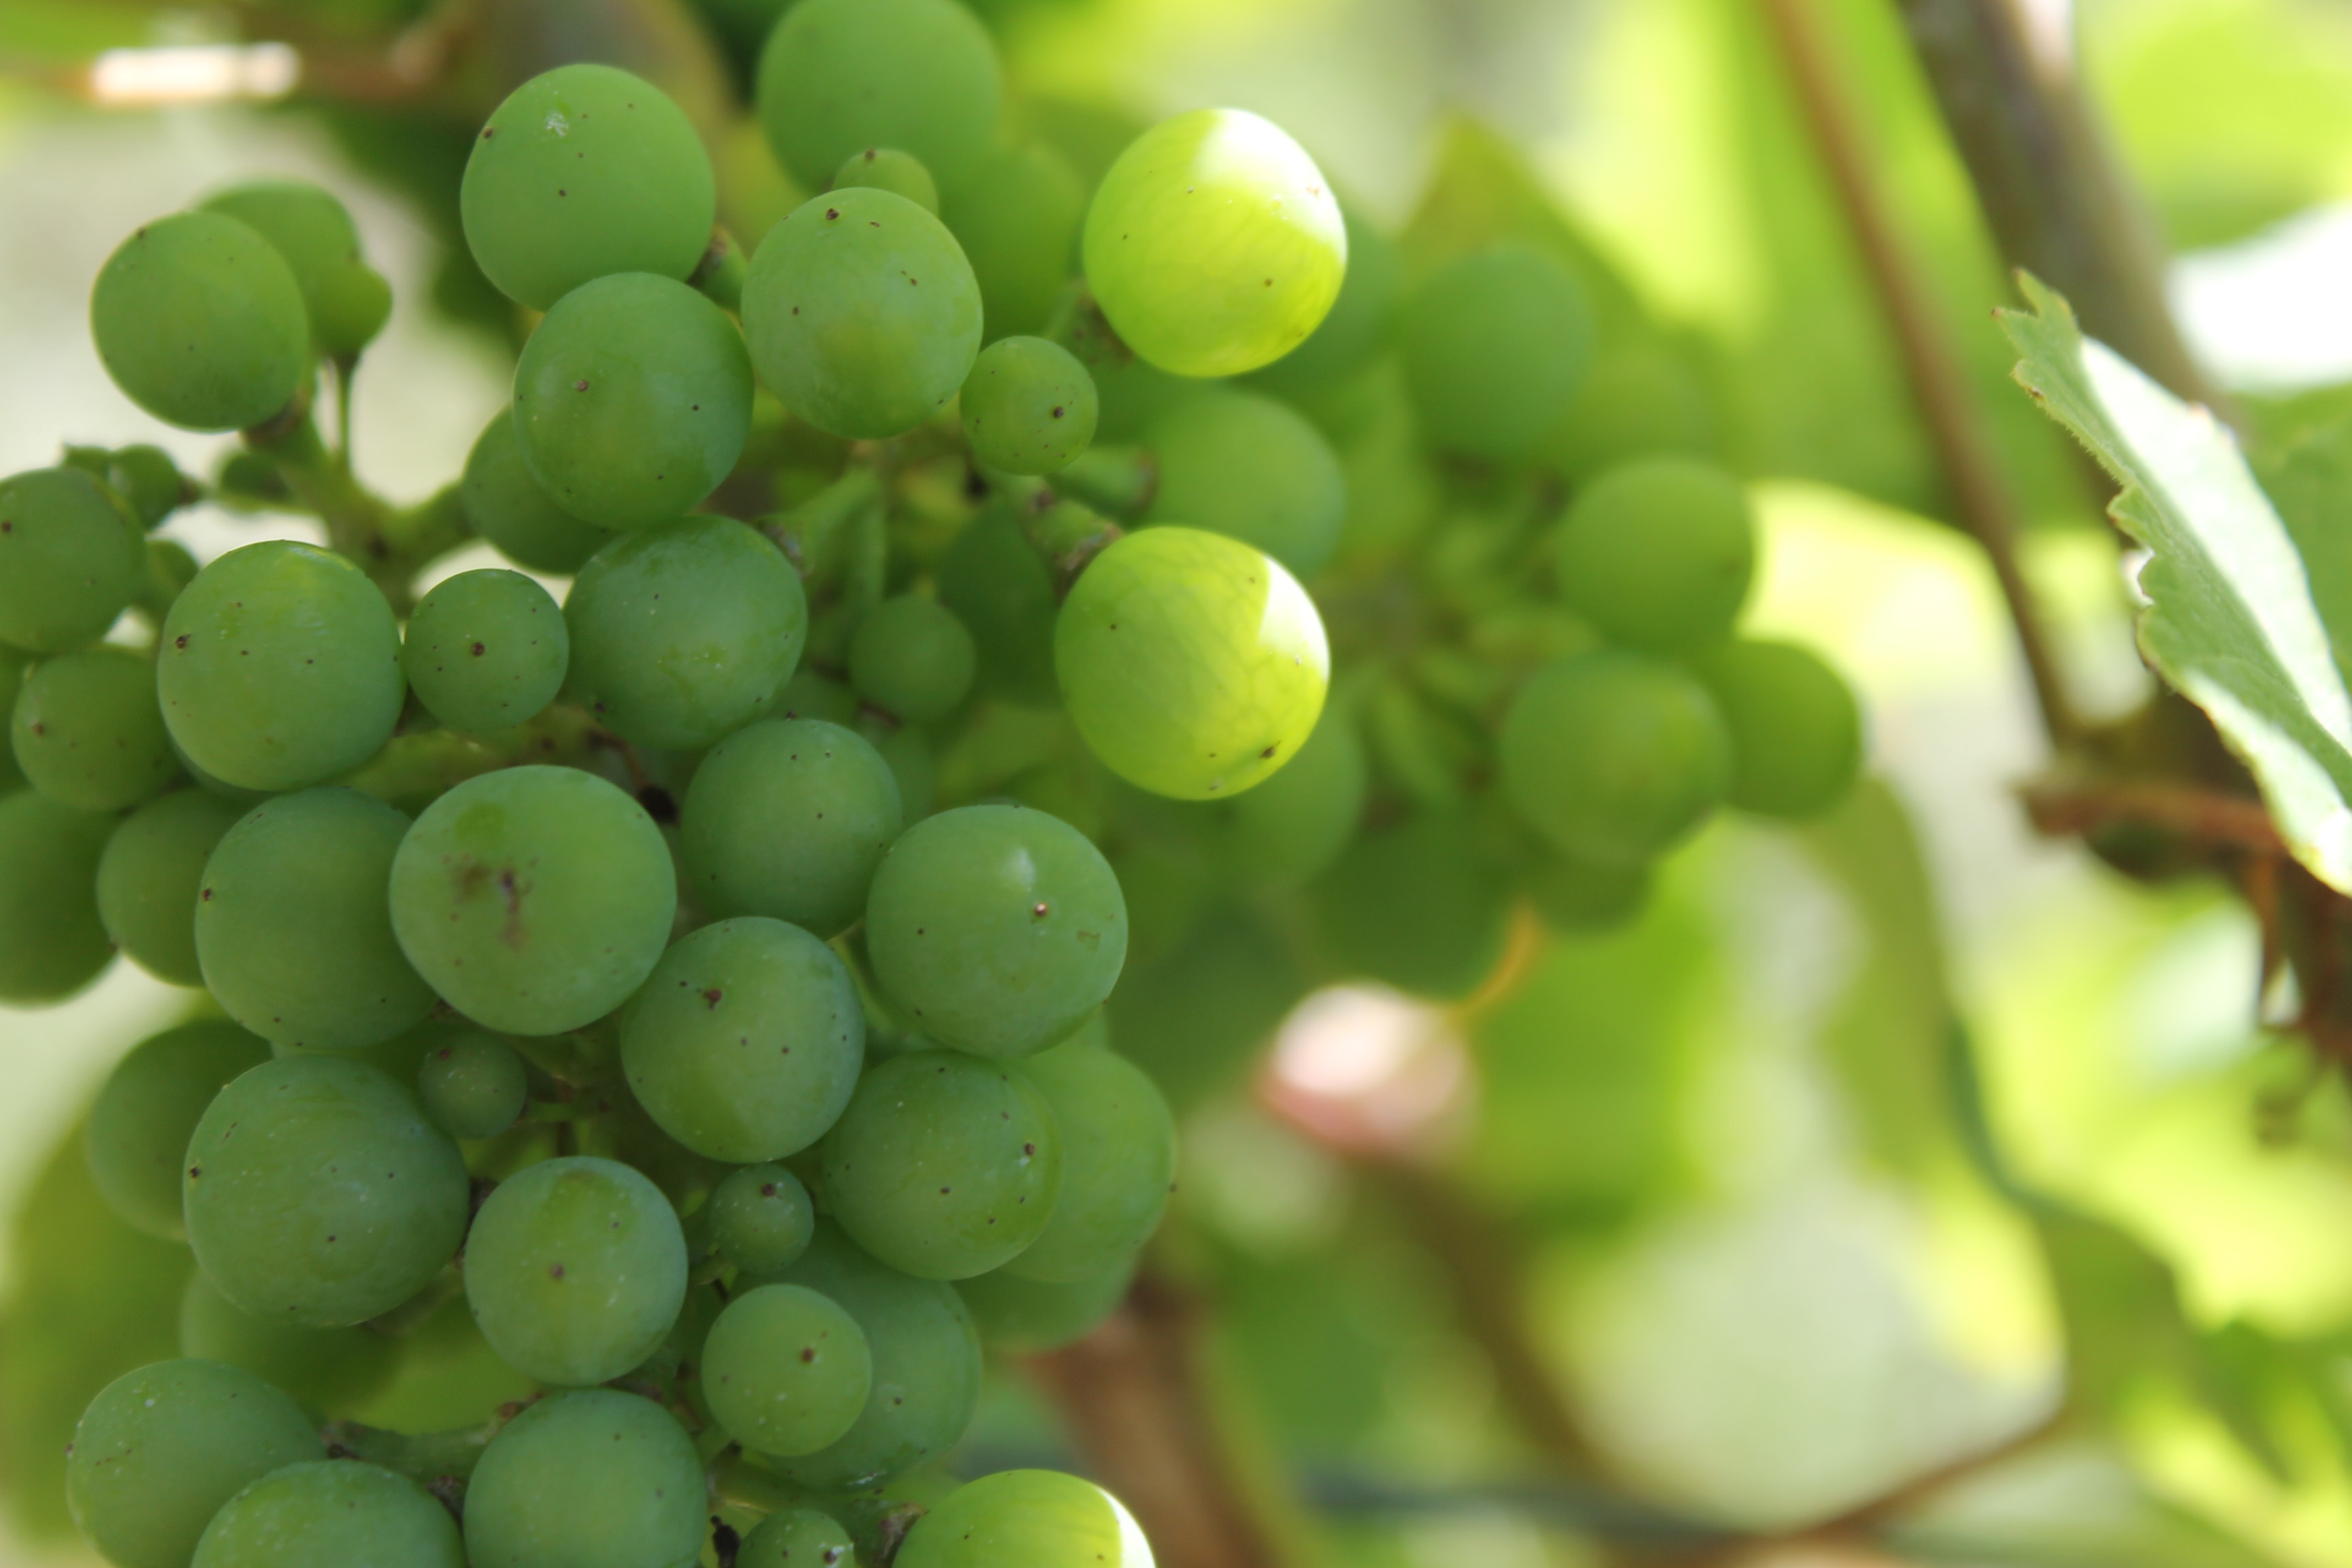 Here is an image of grapes.